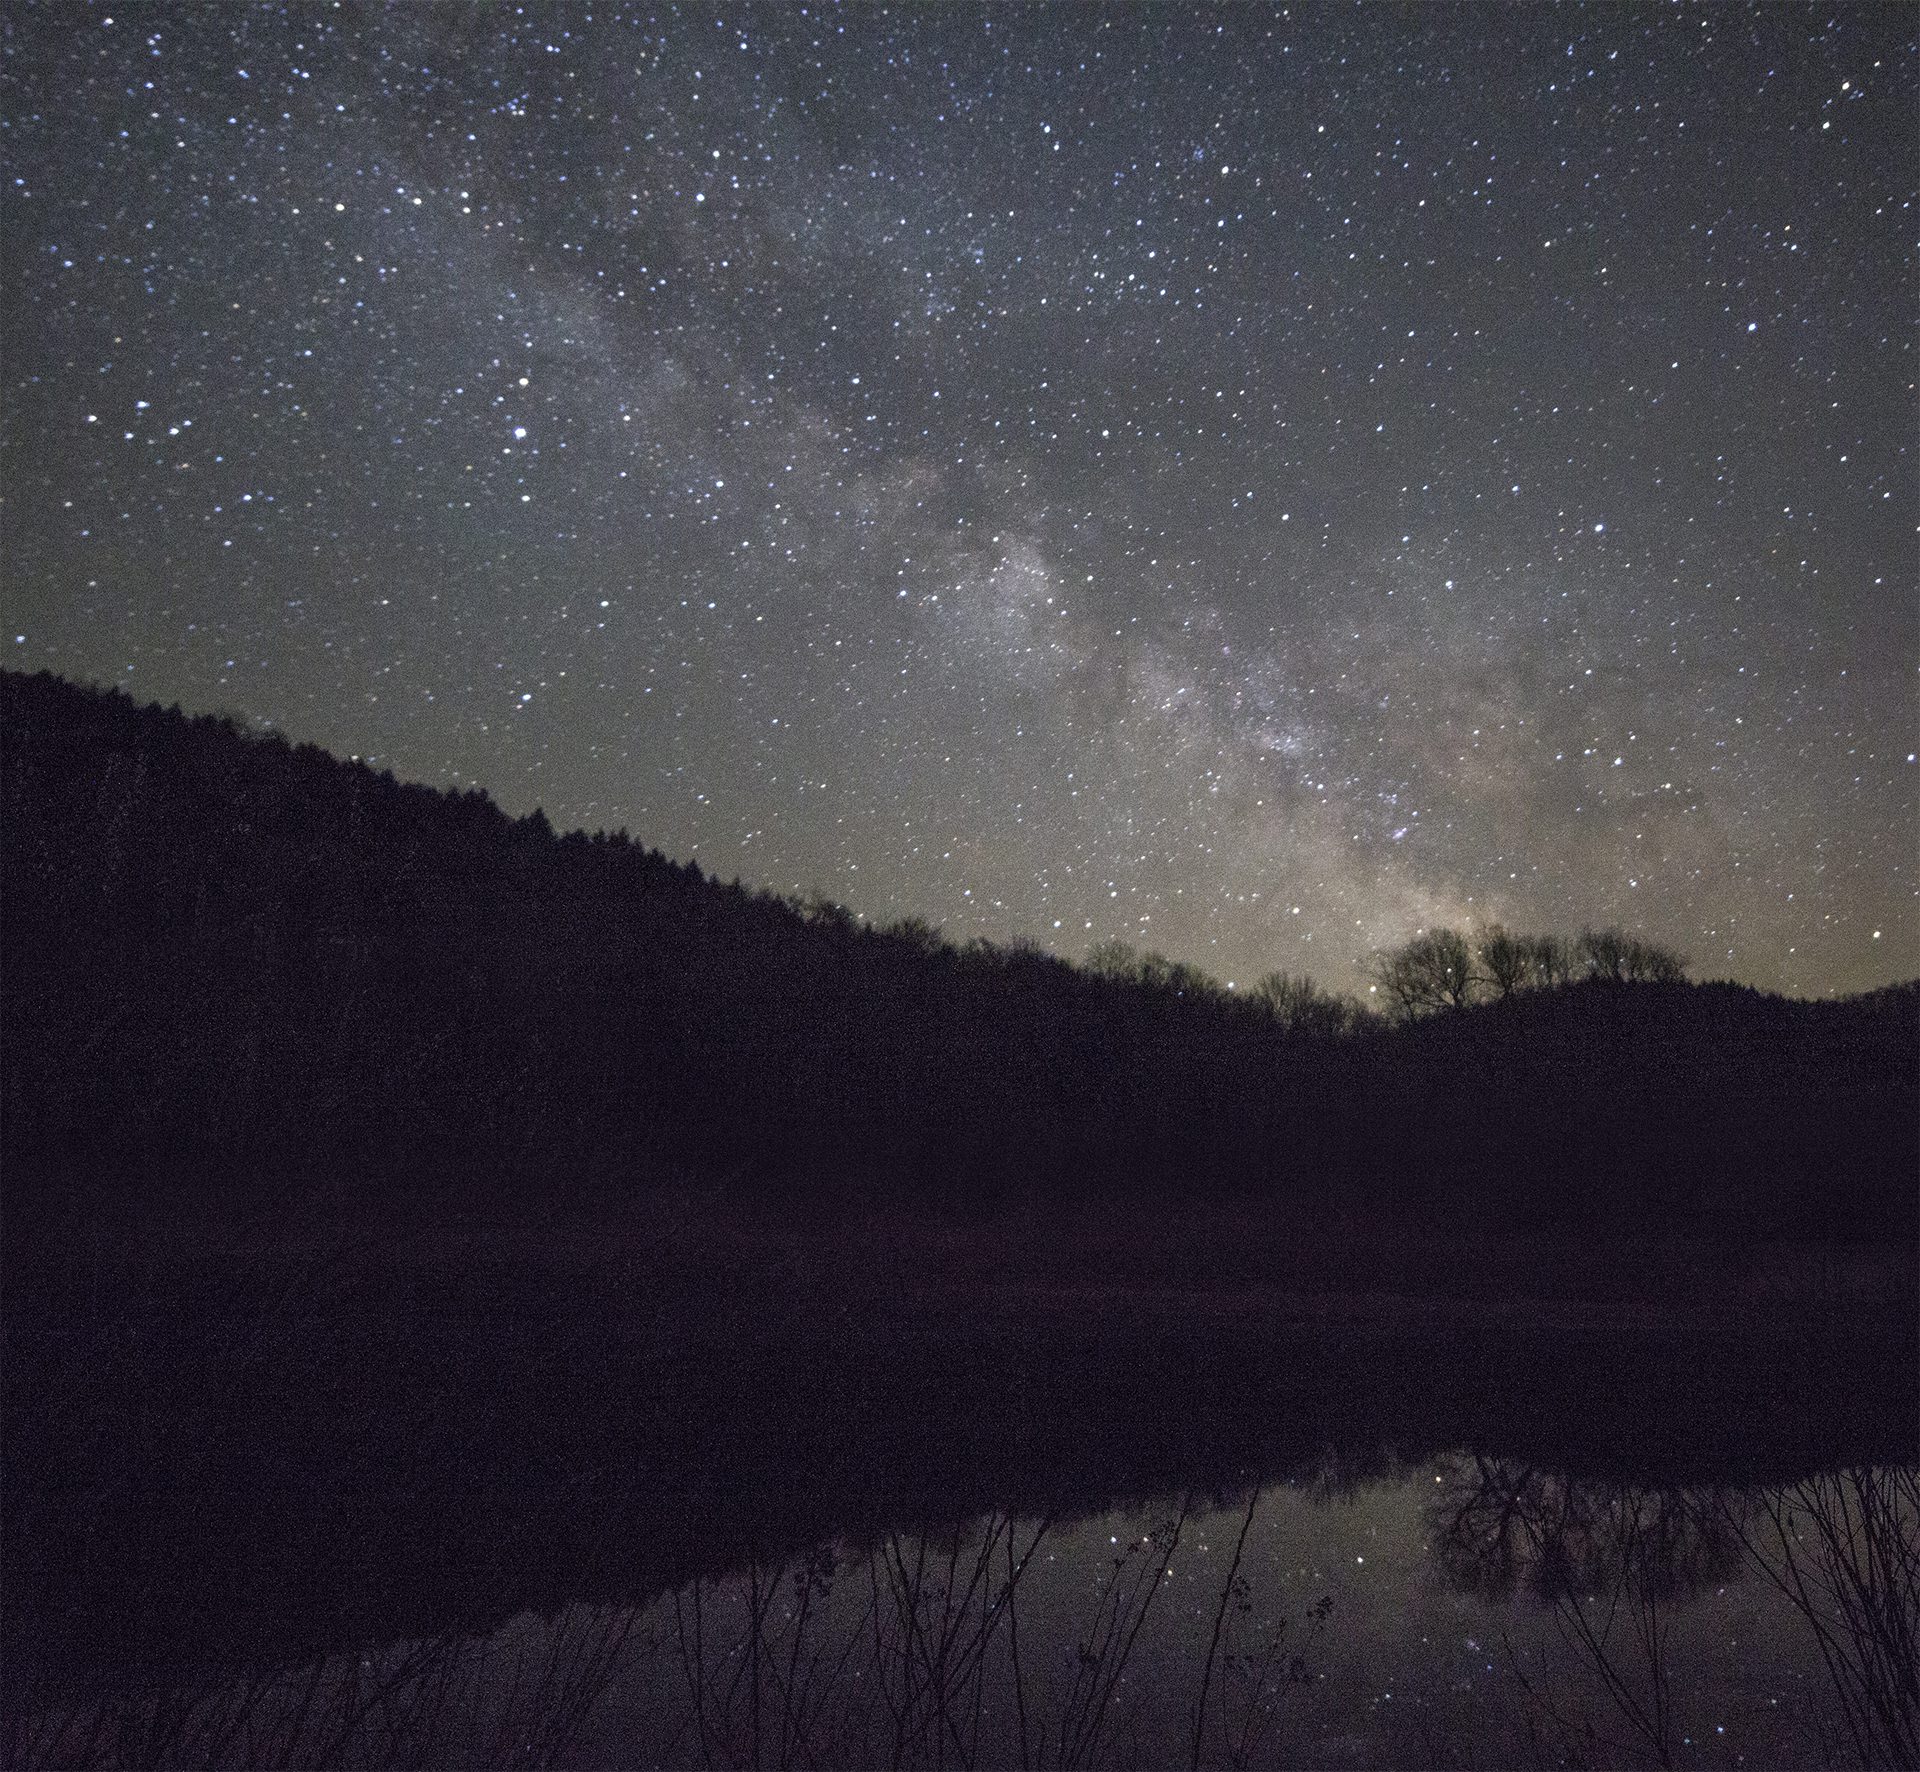 Waterbury Resevoir at night with the Milky Way